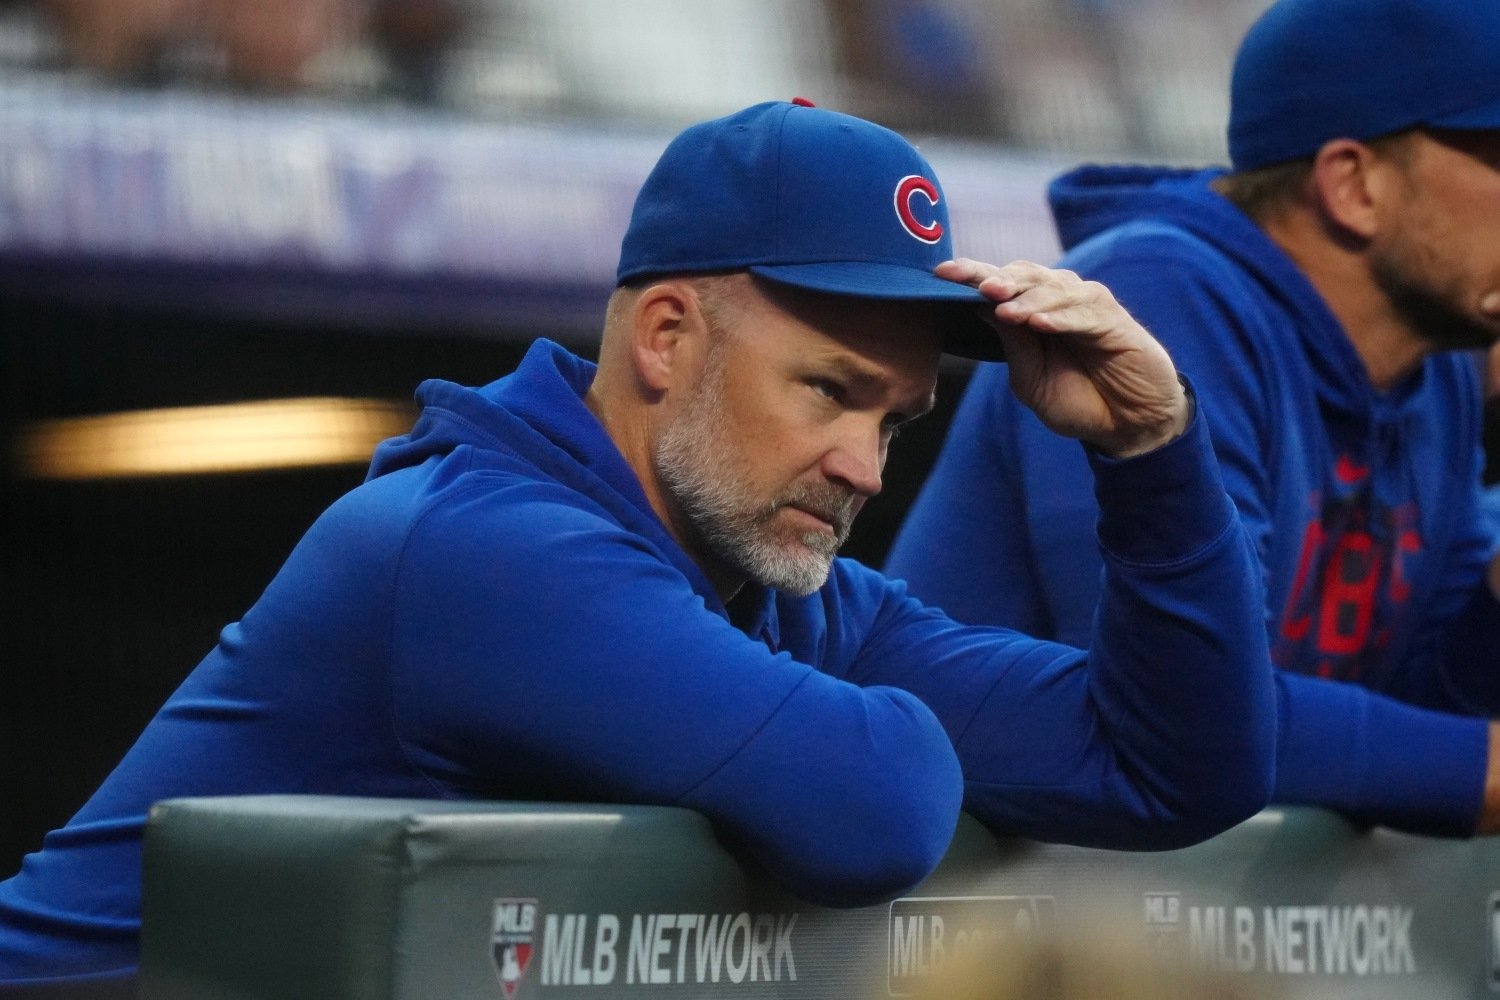 Candelario makes successful return to Chicago Cubs as Mancini is cut to  make room on roster